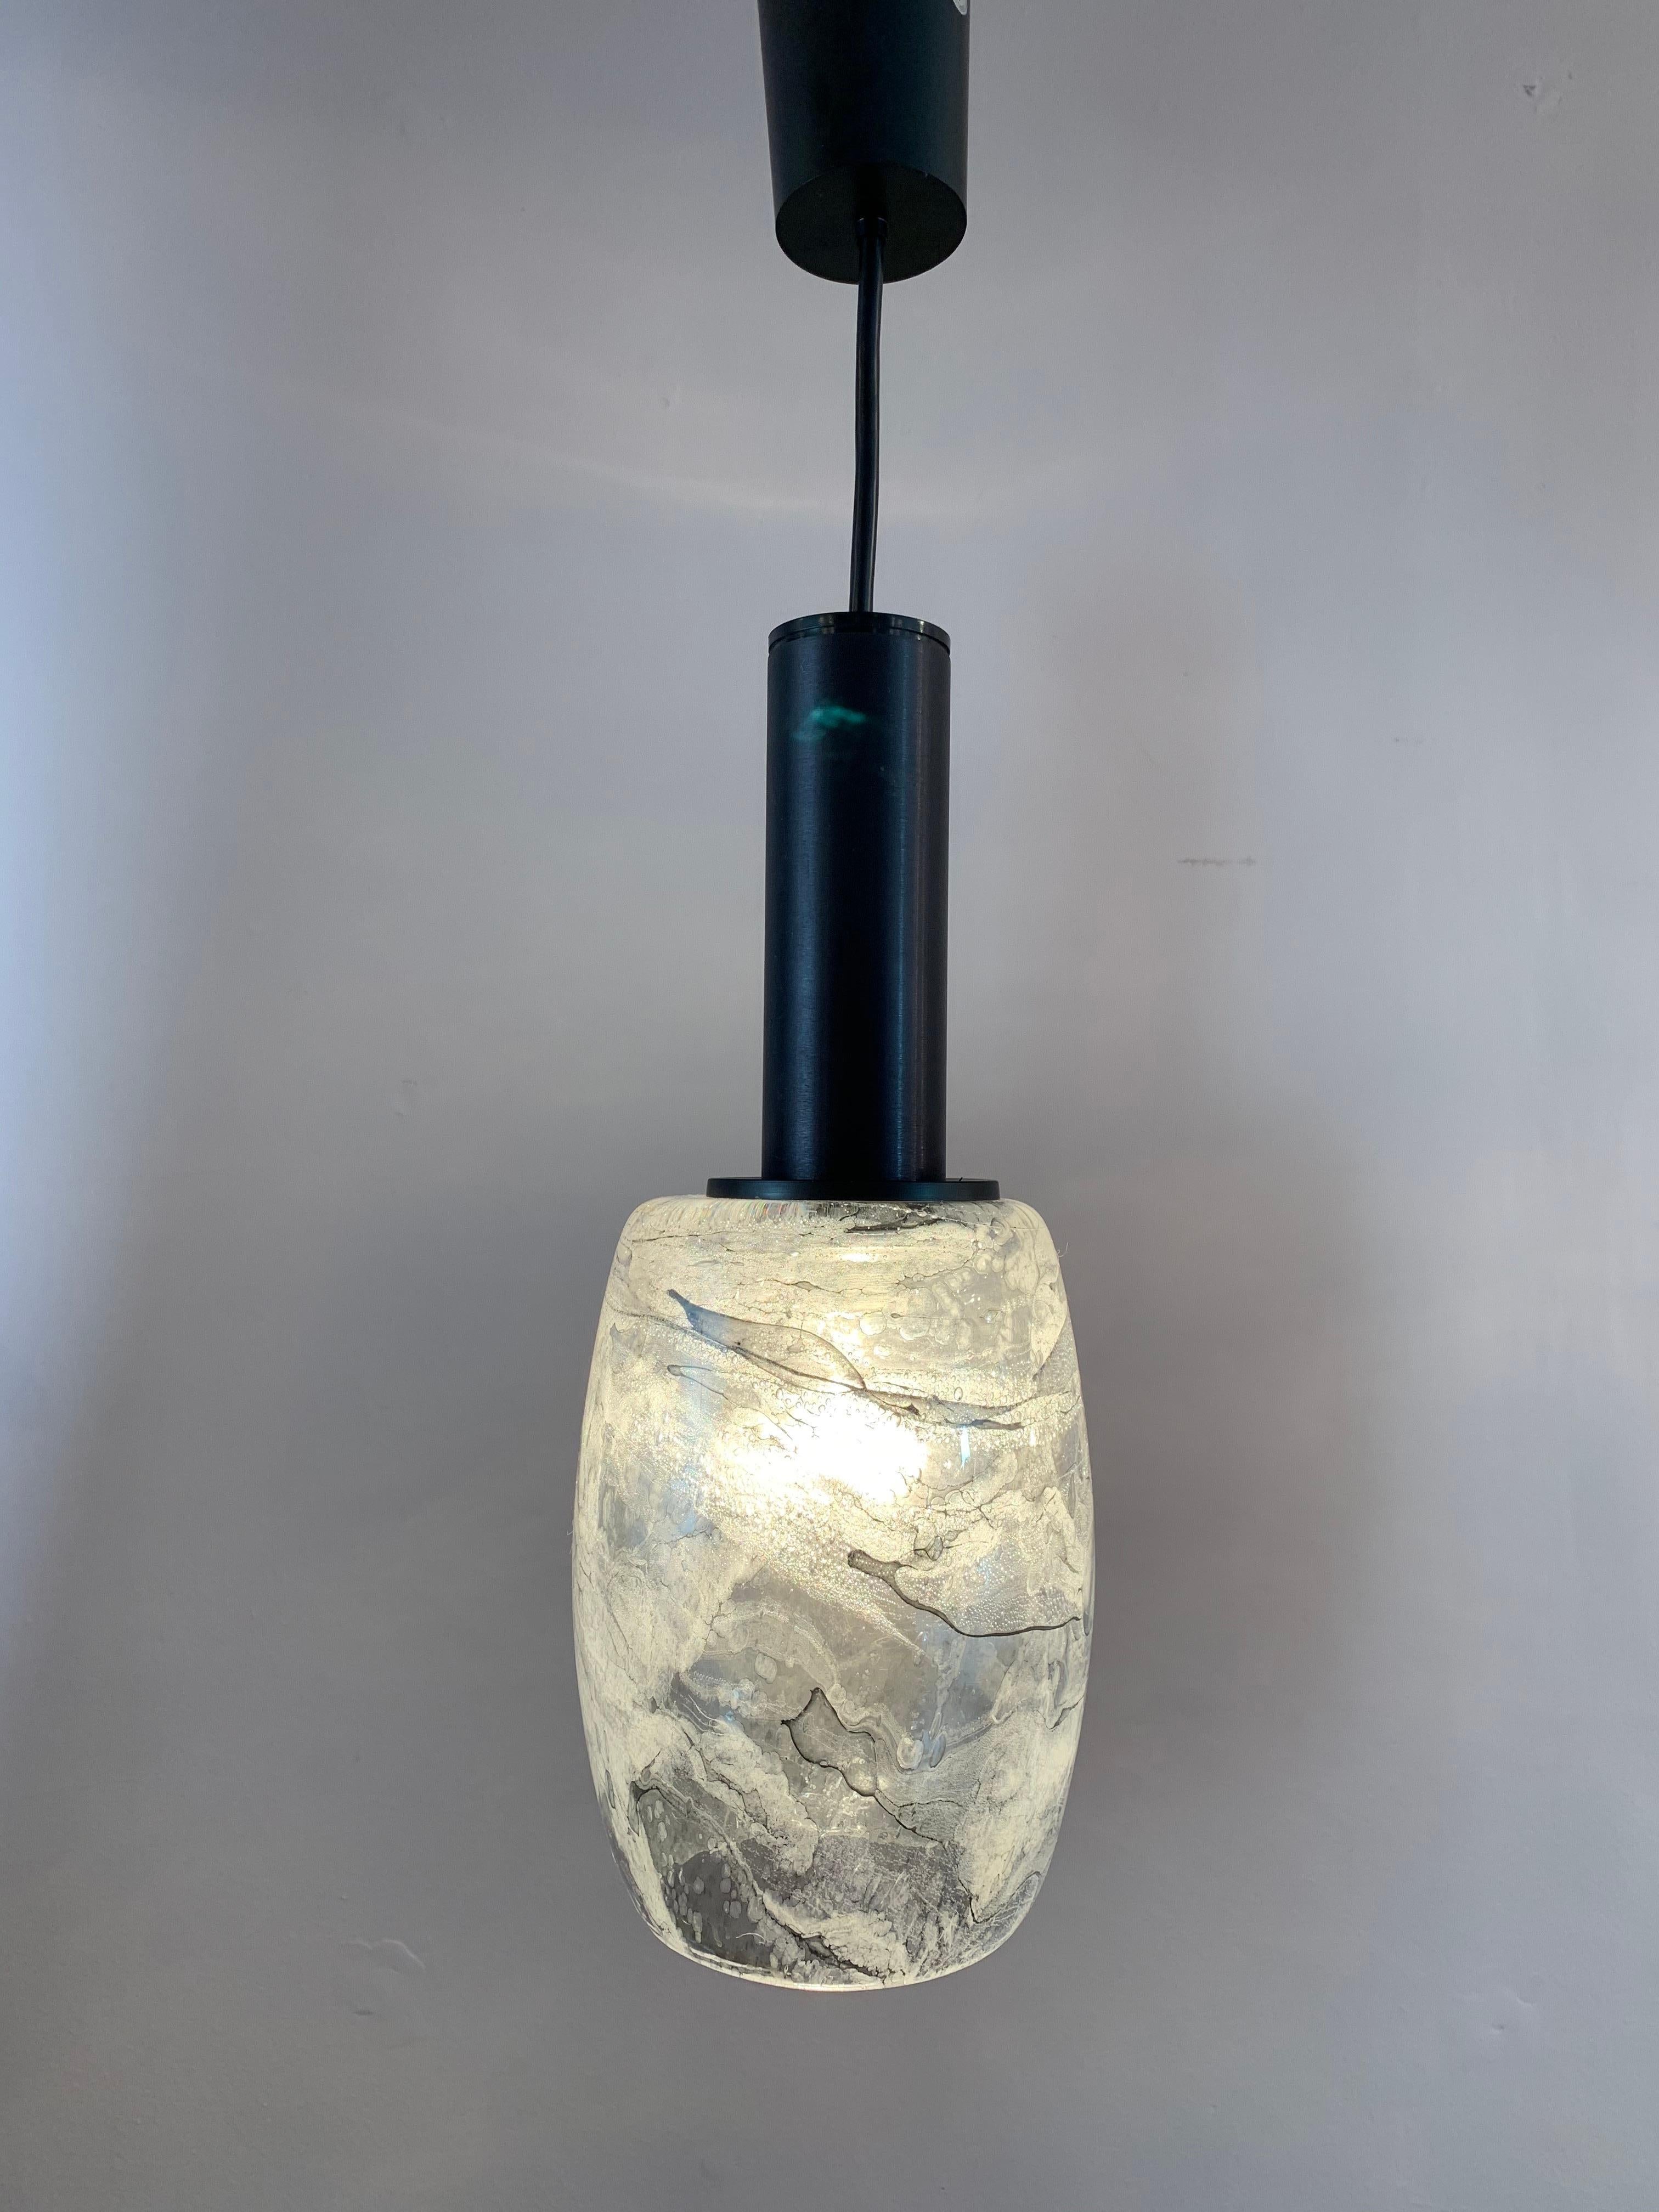 An unusual pair of grey, white and black marble effect hanging pendant lights manufactured in Germany by Peill & Putzler in the 1970s. The thick hand blown glass shades with black metal fittings which are suspended from a height adjustable wire